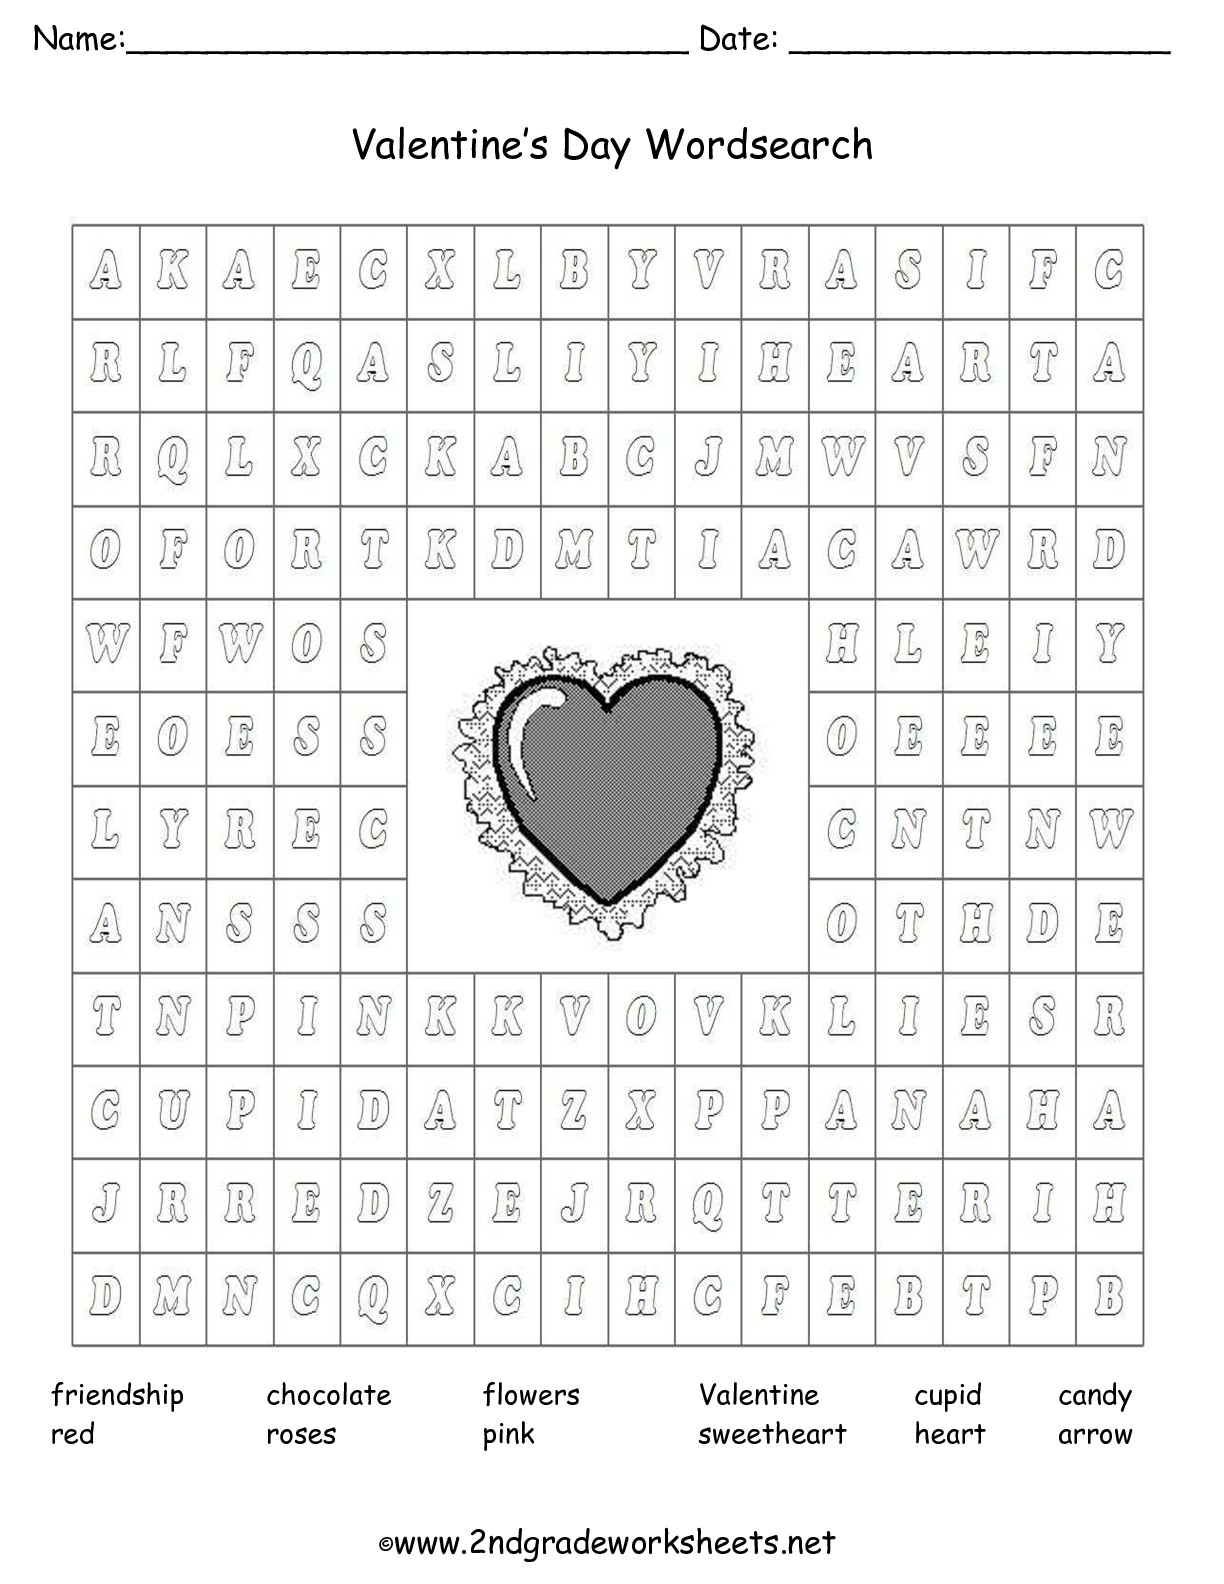 Valentine's Day Printouts and Worksheets